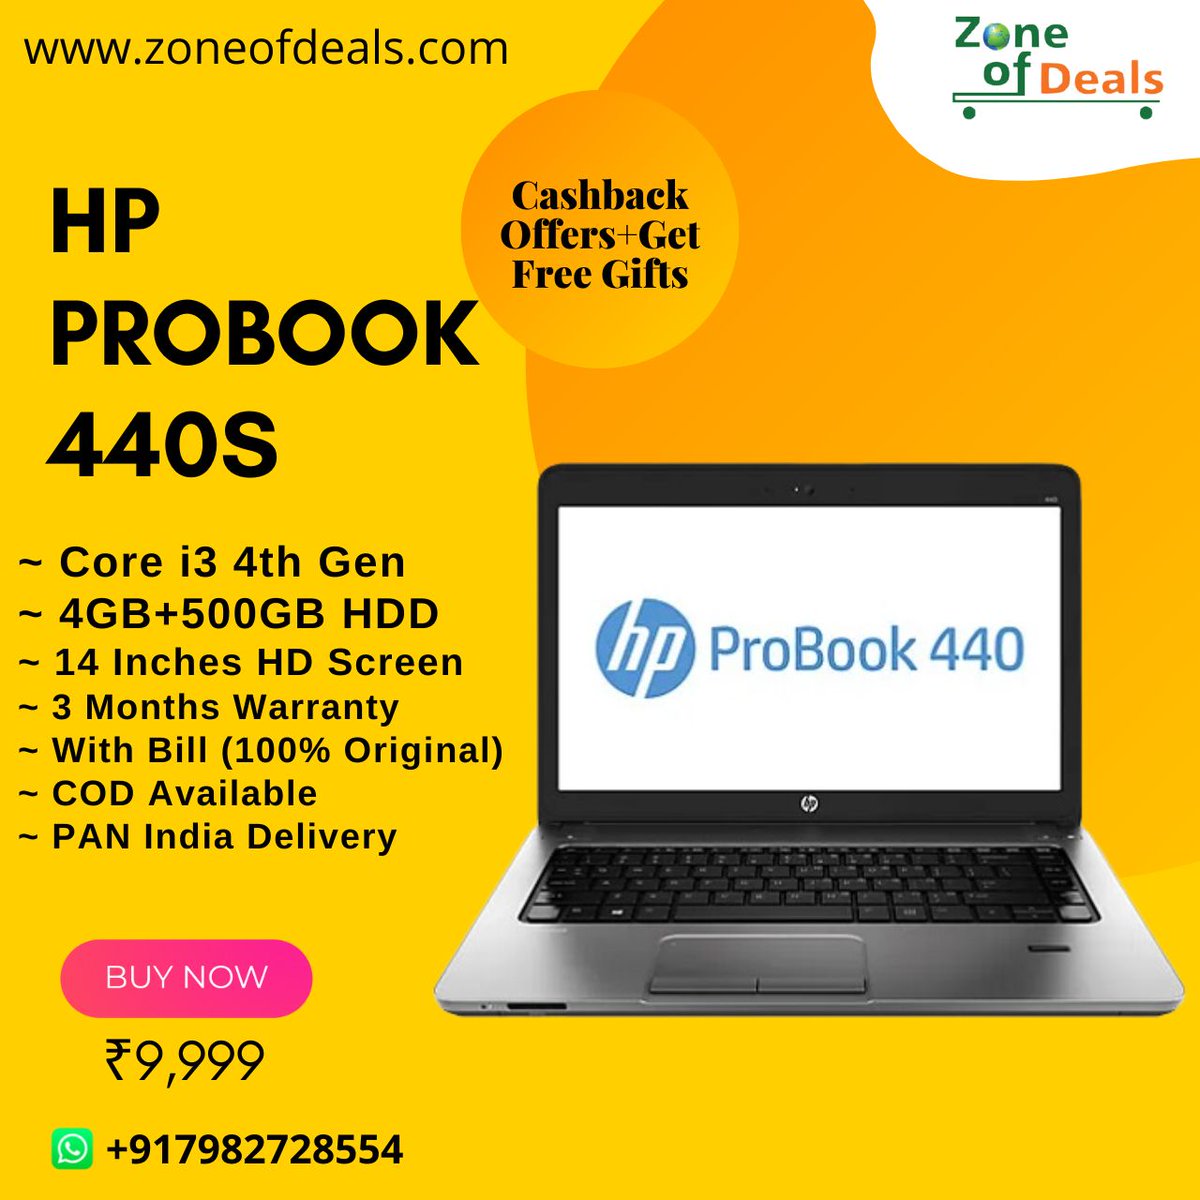 HP PROBOOK 440s - INTEL Core i3 4th Gen 4GB+500GB - Refurbished Laptop - Excellent New Condition. 
COD Also Available
Safe Shipping Through Reputed Courier Services.
#refurbishedlaptops #laptopsforstudents #delllaptops #corei7 #workstations #laptopsunder30000 #graphicscards #dell